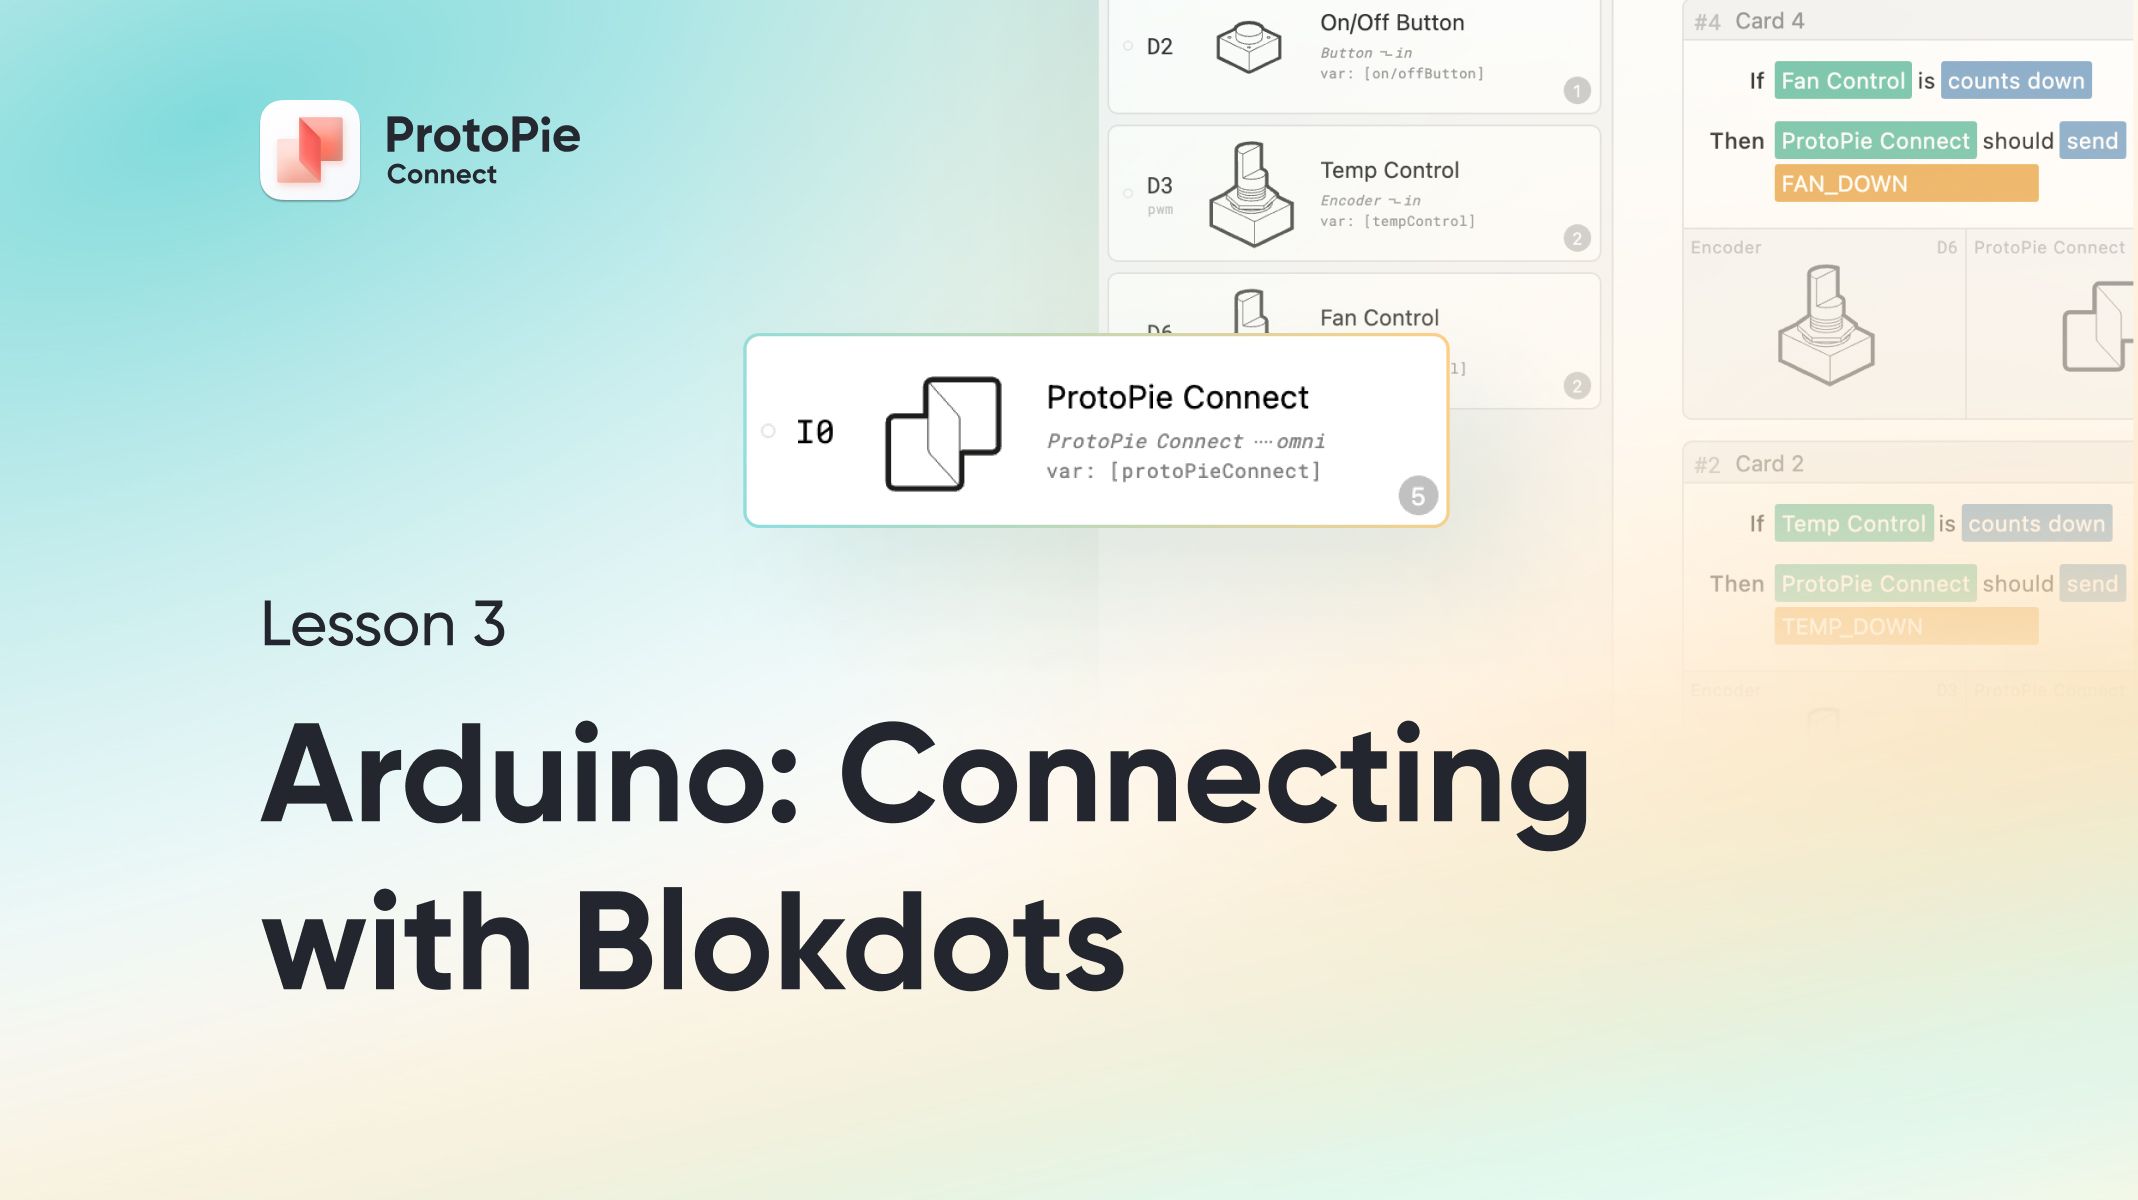 Intro to ProtoPie Connect 3 of 7: Arduino Part 1 - Connecting with Blokdots